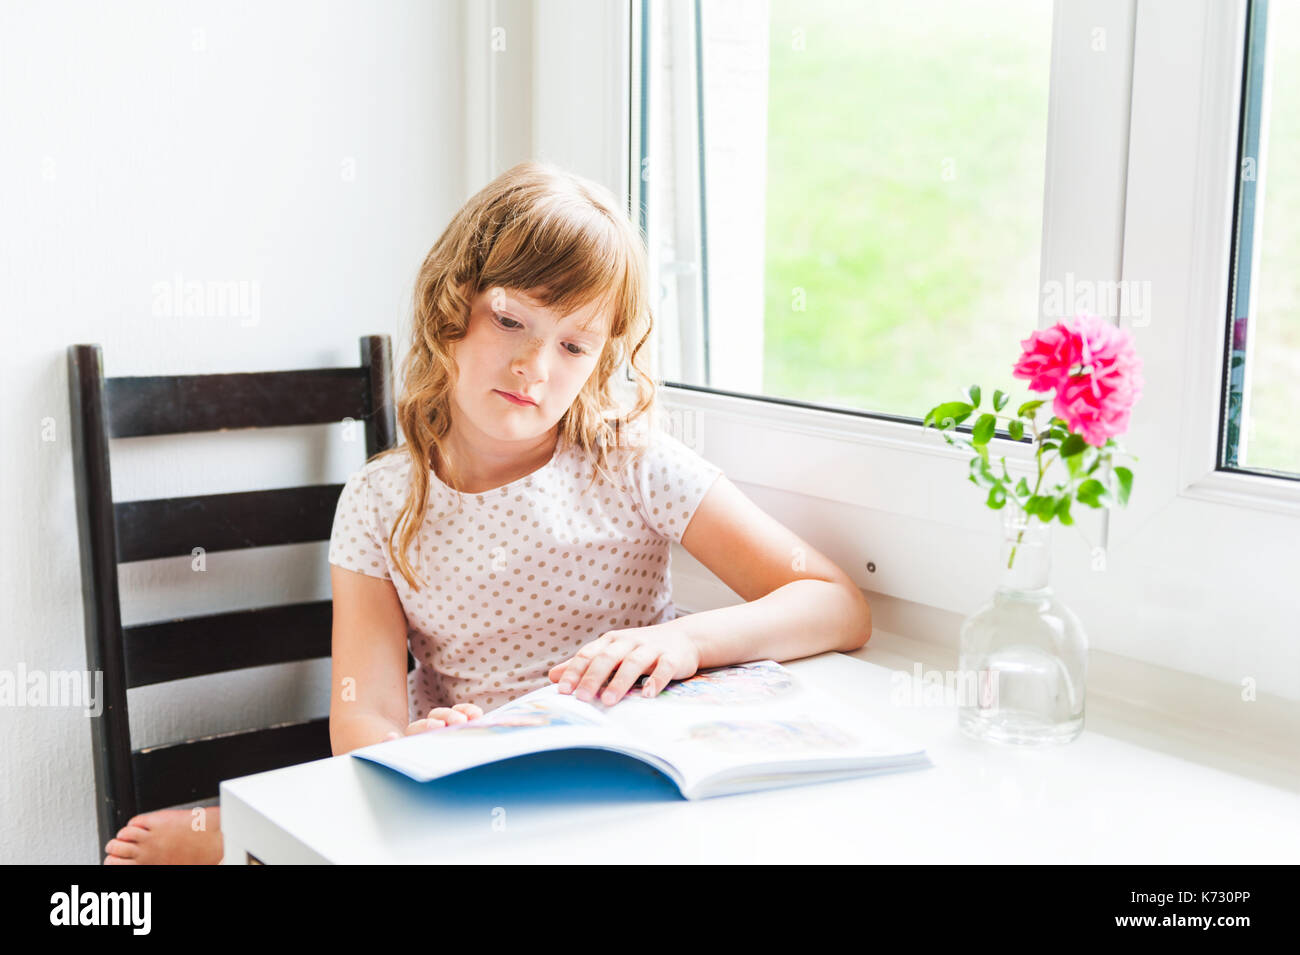 Interior portrait of a cute little girl reading a book Stock Photo